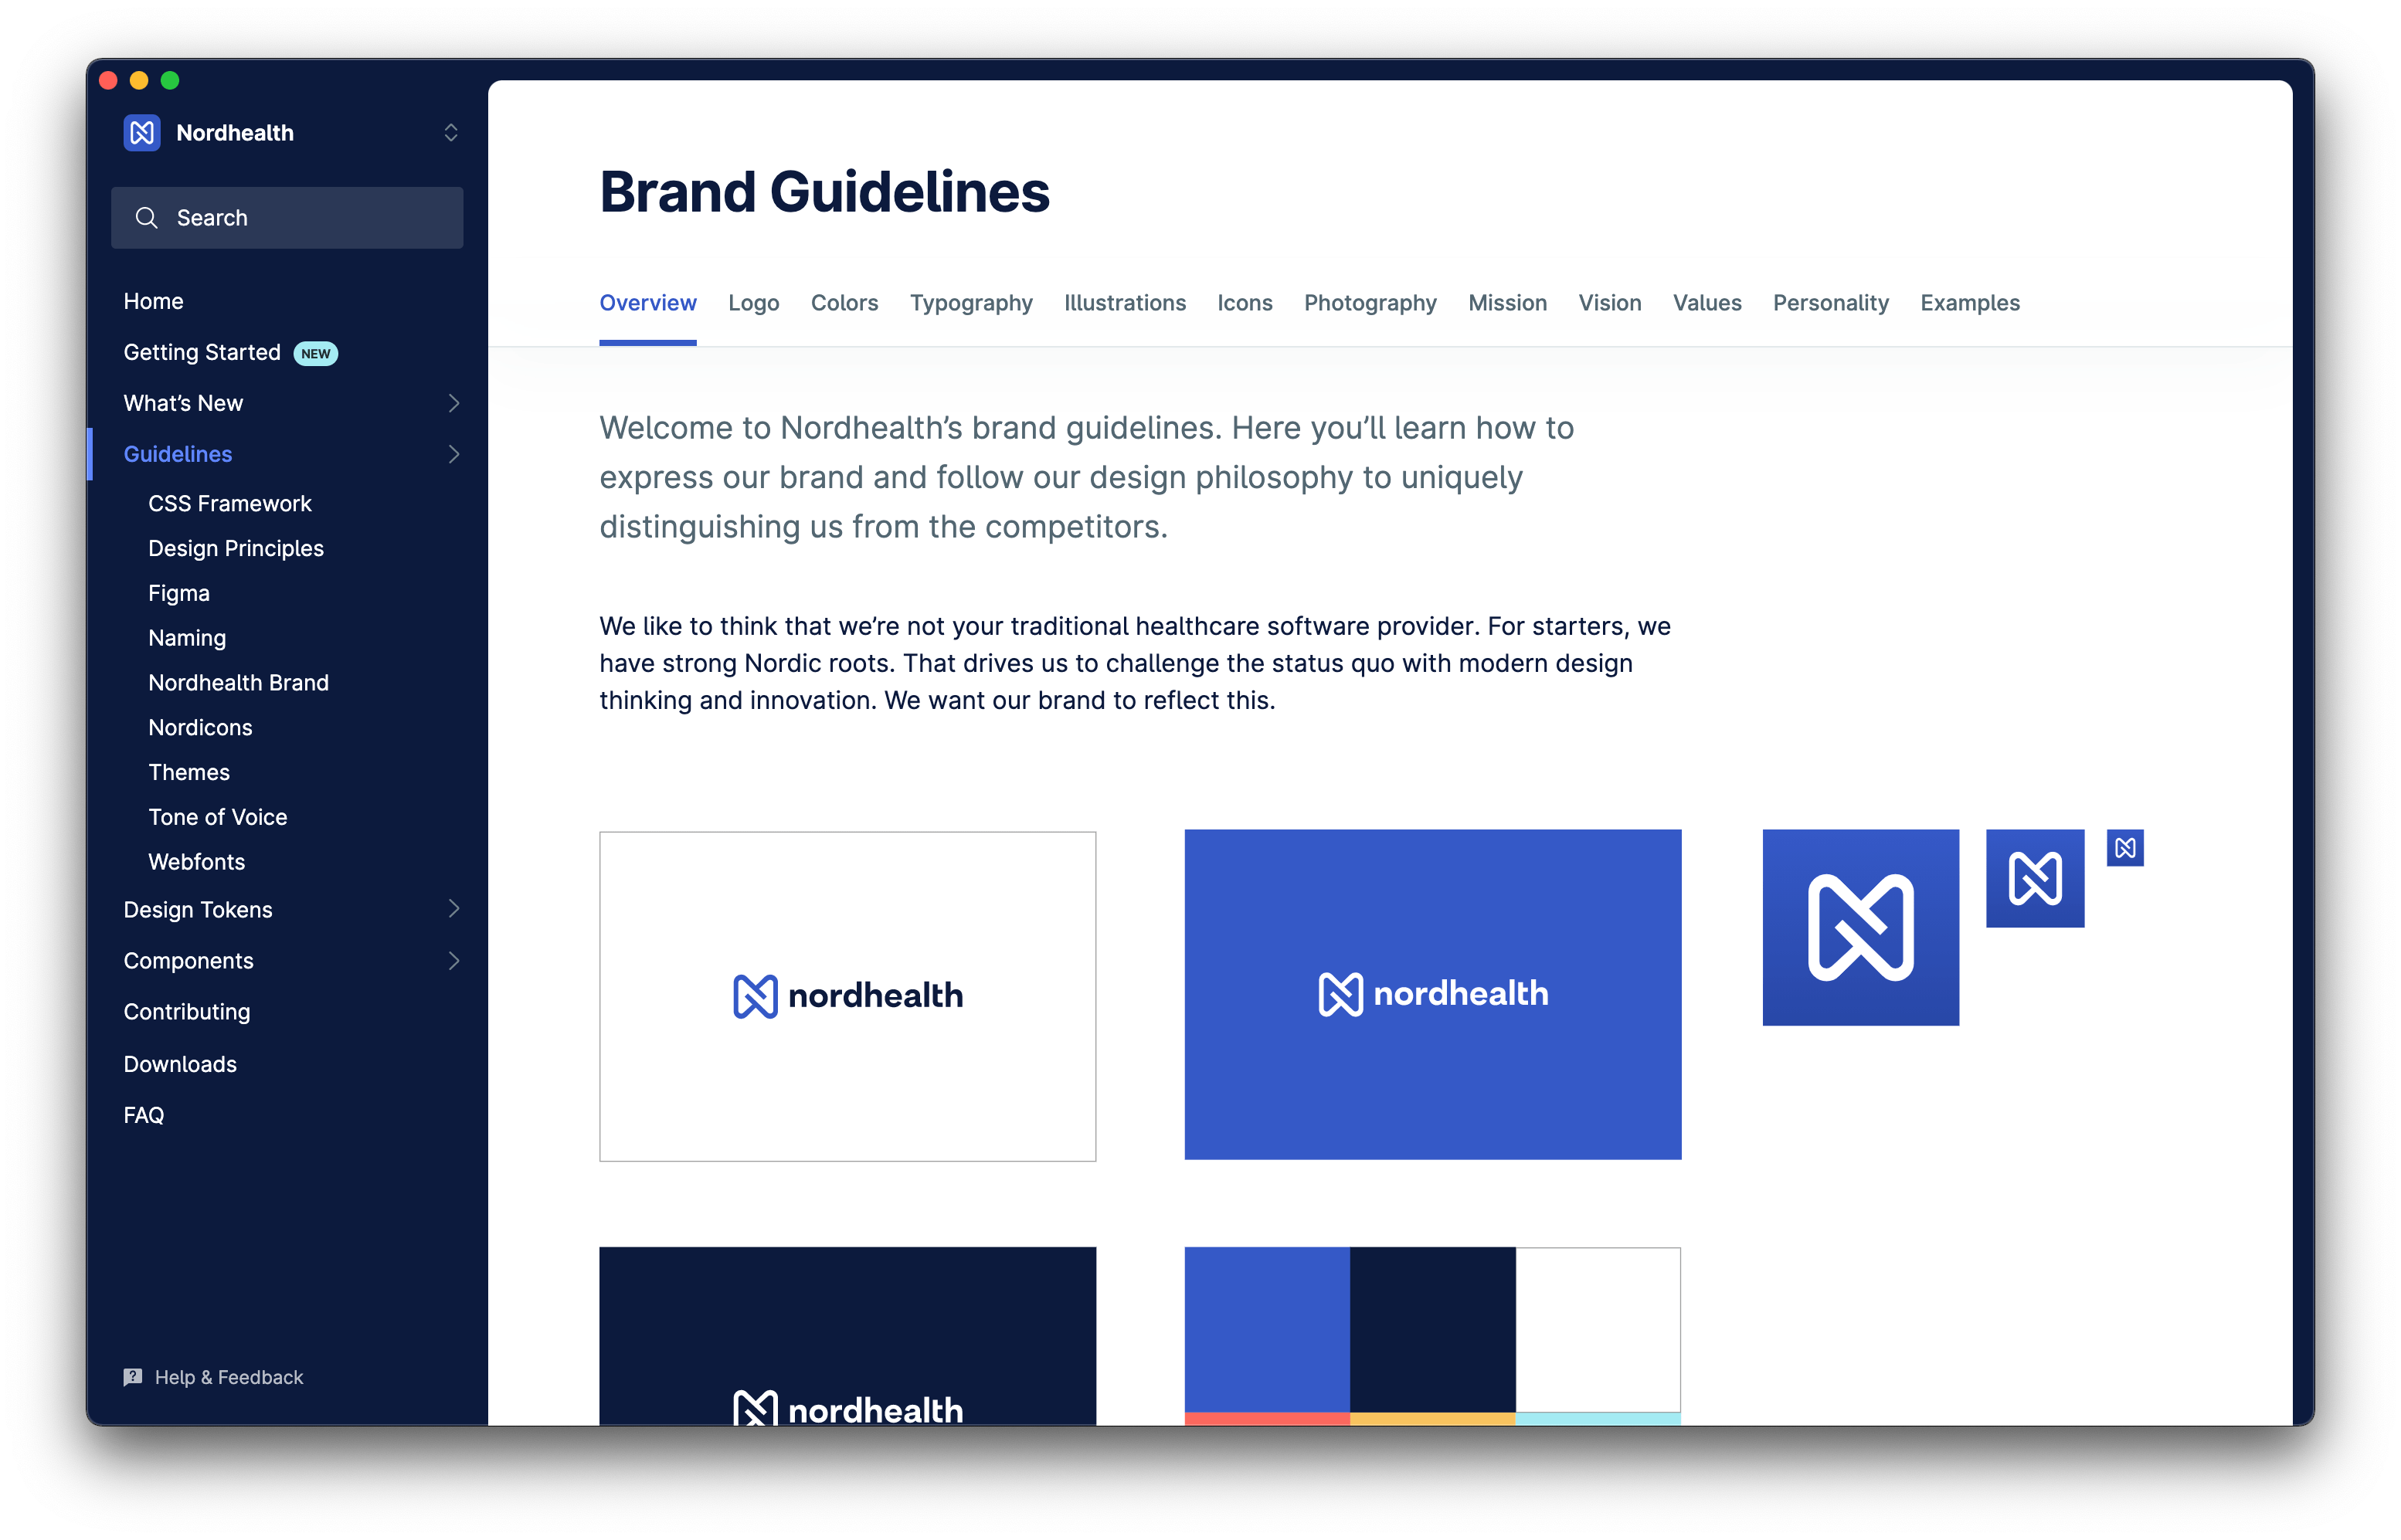 Nordhealth brand guidelines